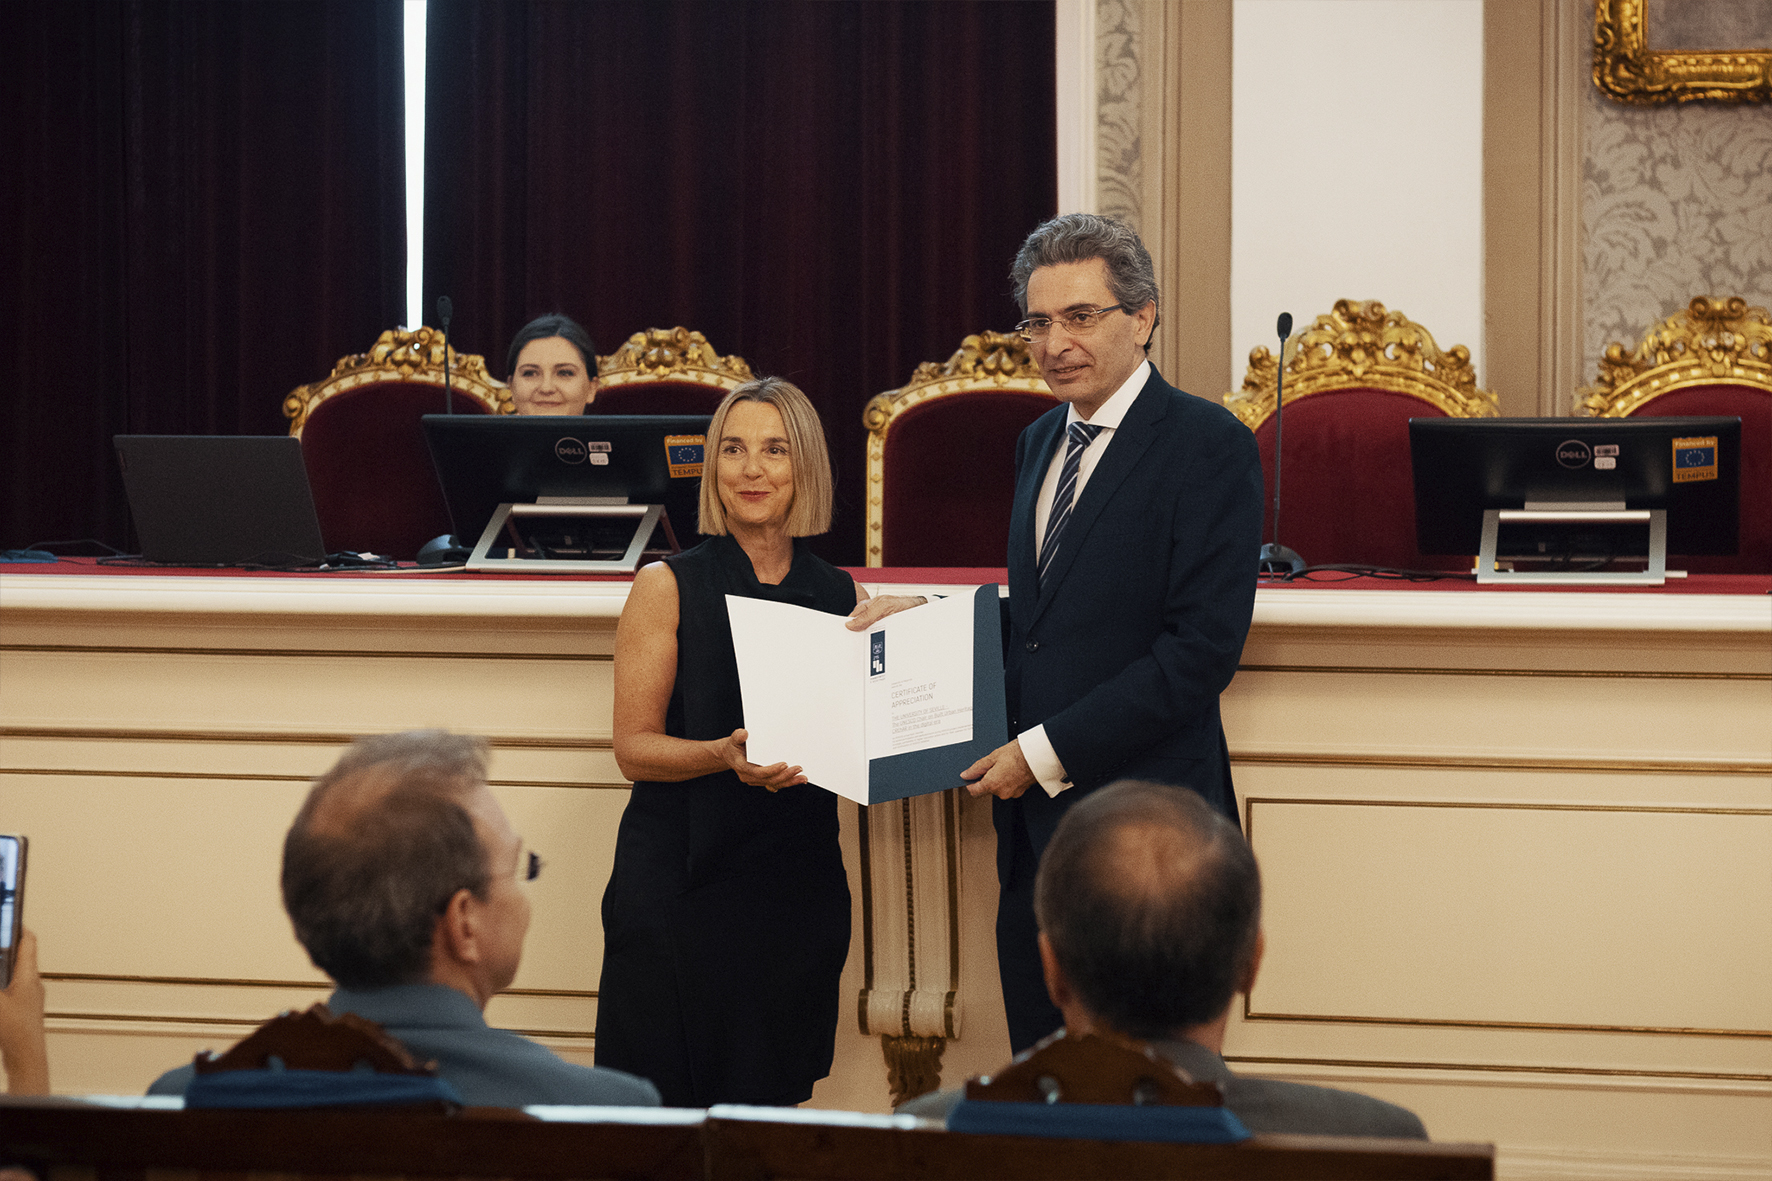 His excellency Raul Bartolome Molina, Ambassador of Spain in Serbia handing out the Certificate of Appreciation to the University of Seville from Spain, received by Prof. Dr. Mar Loren Mendez, Scientific Coordinator of HERSUS Project for University of Seville. © Marko Miladinović